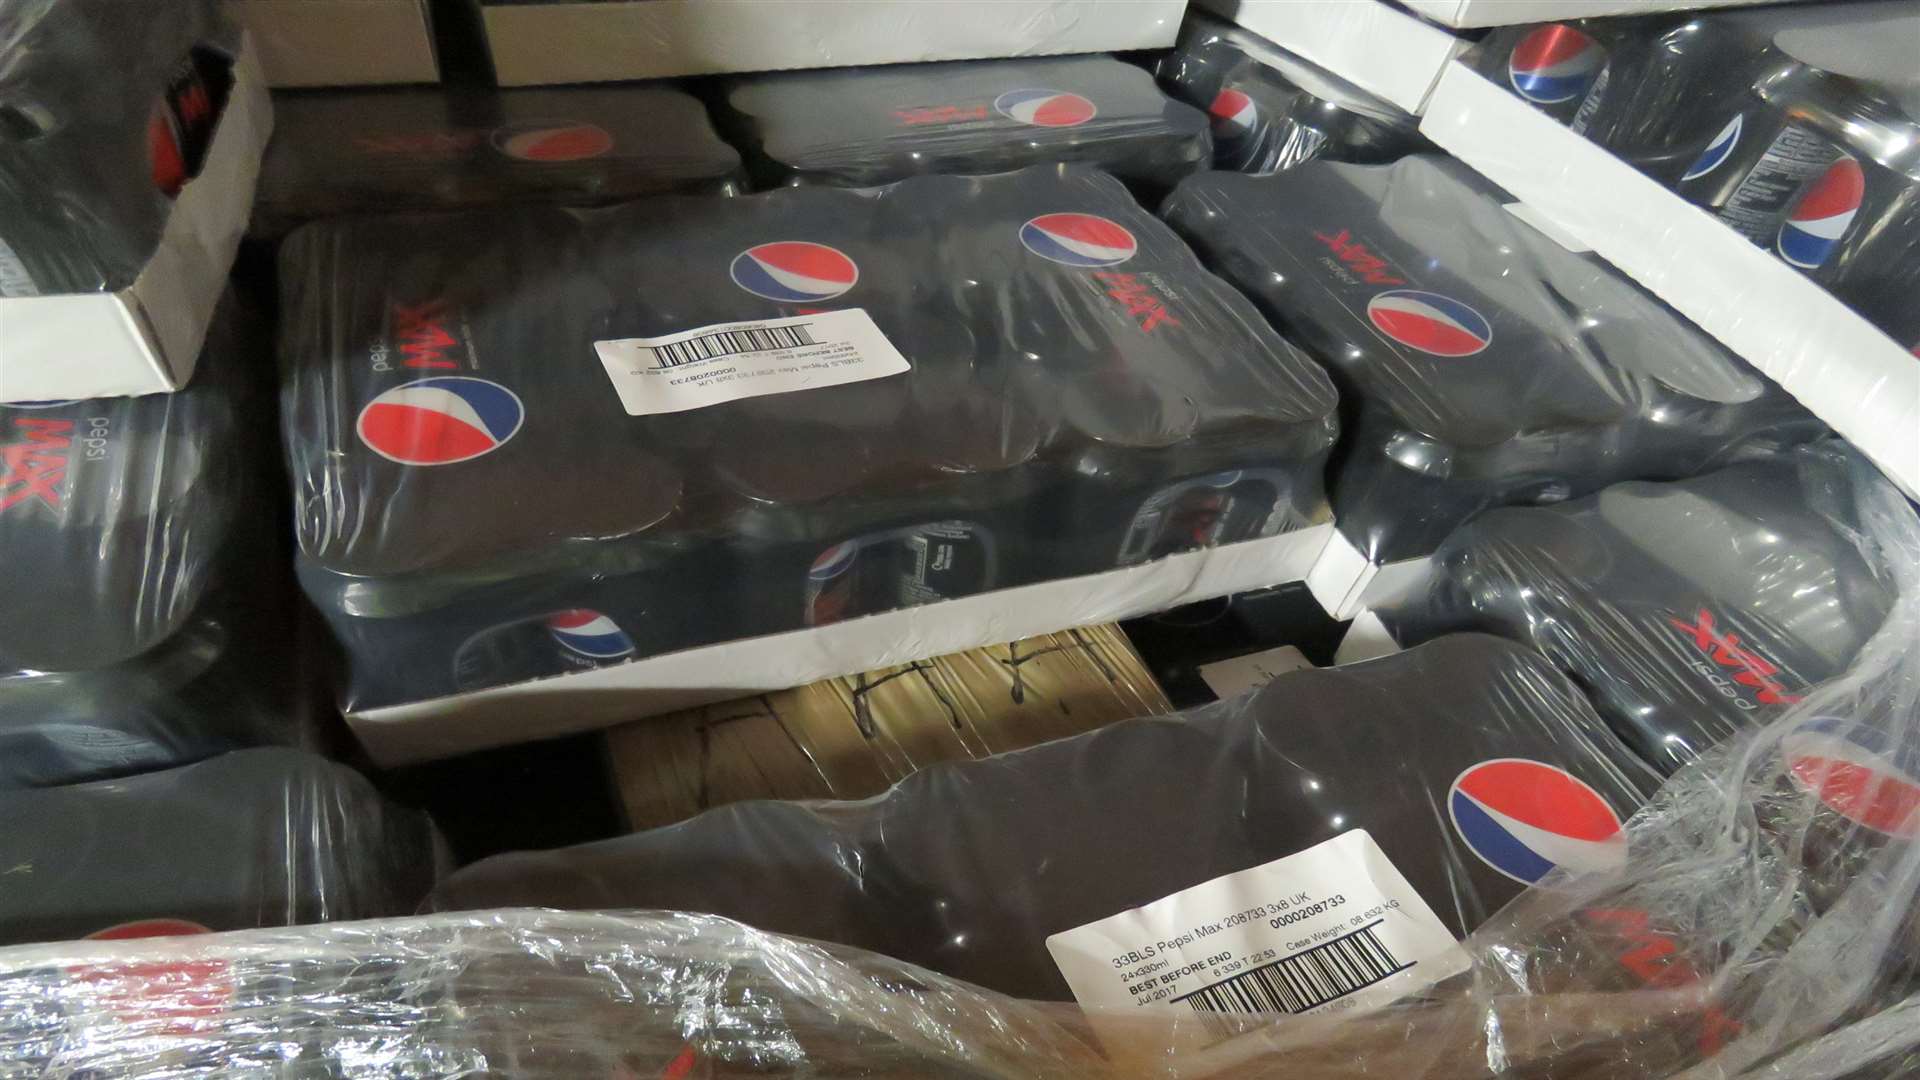 The packages of cocaine hidden among Pepsi Max can, brought into Dover.